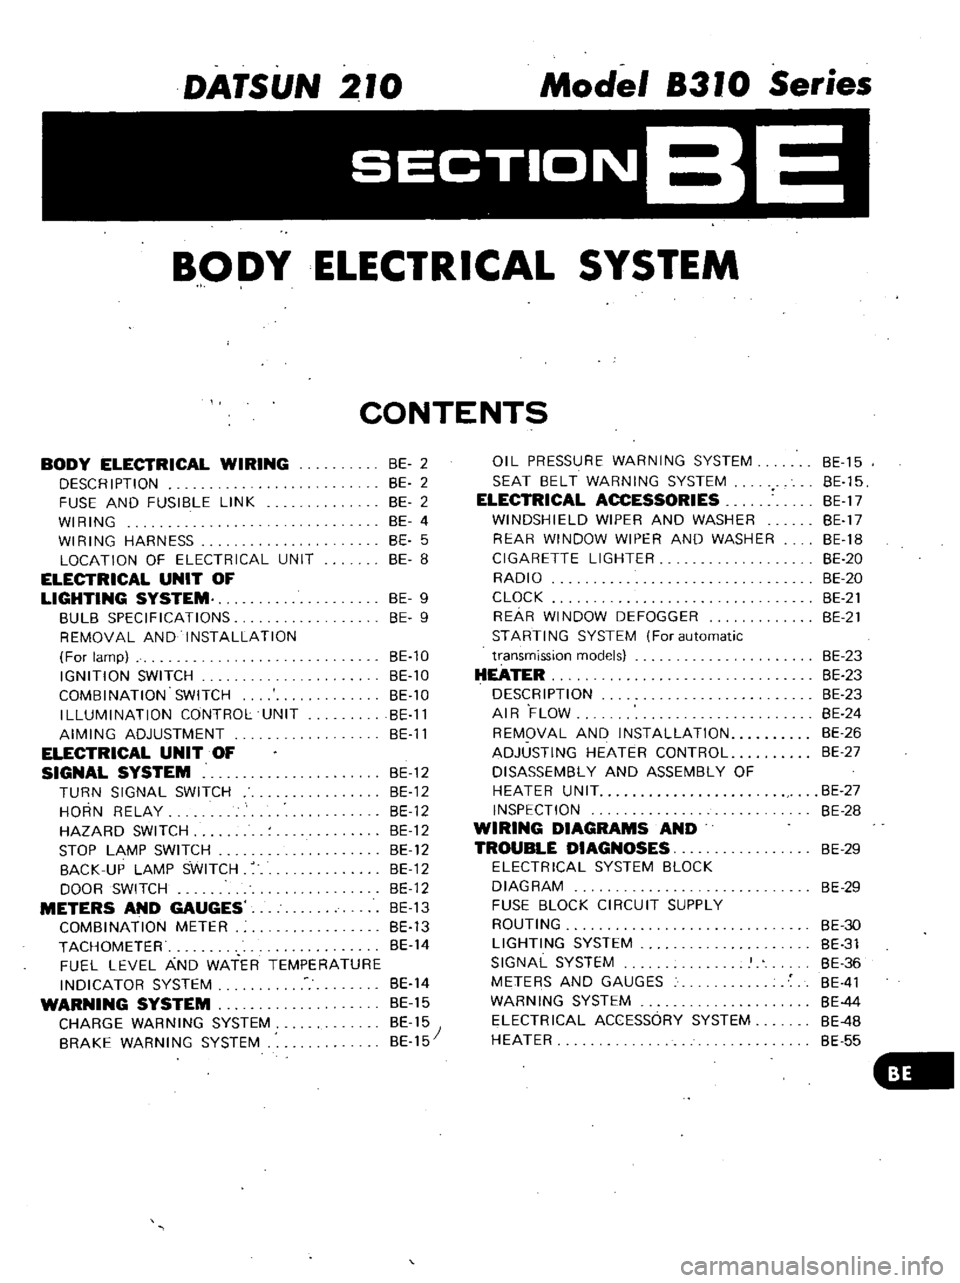 DATSUN 210 1979  Service Manual 
DATSUN 
210 
Model 
8310 
Series

SECTIONBE

BODY 
ELECTRICAL 
SYSTEM

CONTENTS

BODY 
ELECTRICAL 
WIRING

DESCRIPTION

FUSE 
AND 
FUSIBLE 
LINK

WIRING

WIRING 
HARNESS

LOCATION 
OF 
ELECTRICAL 
UN